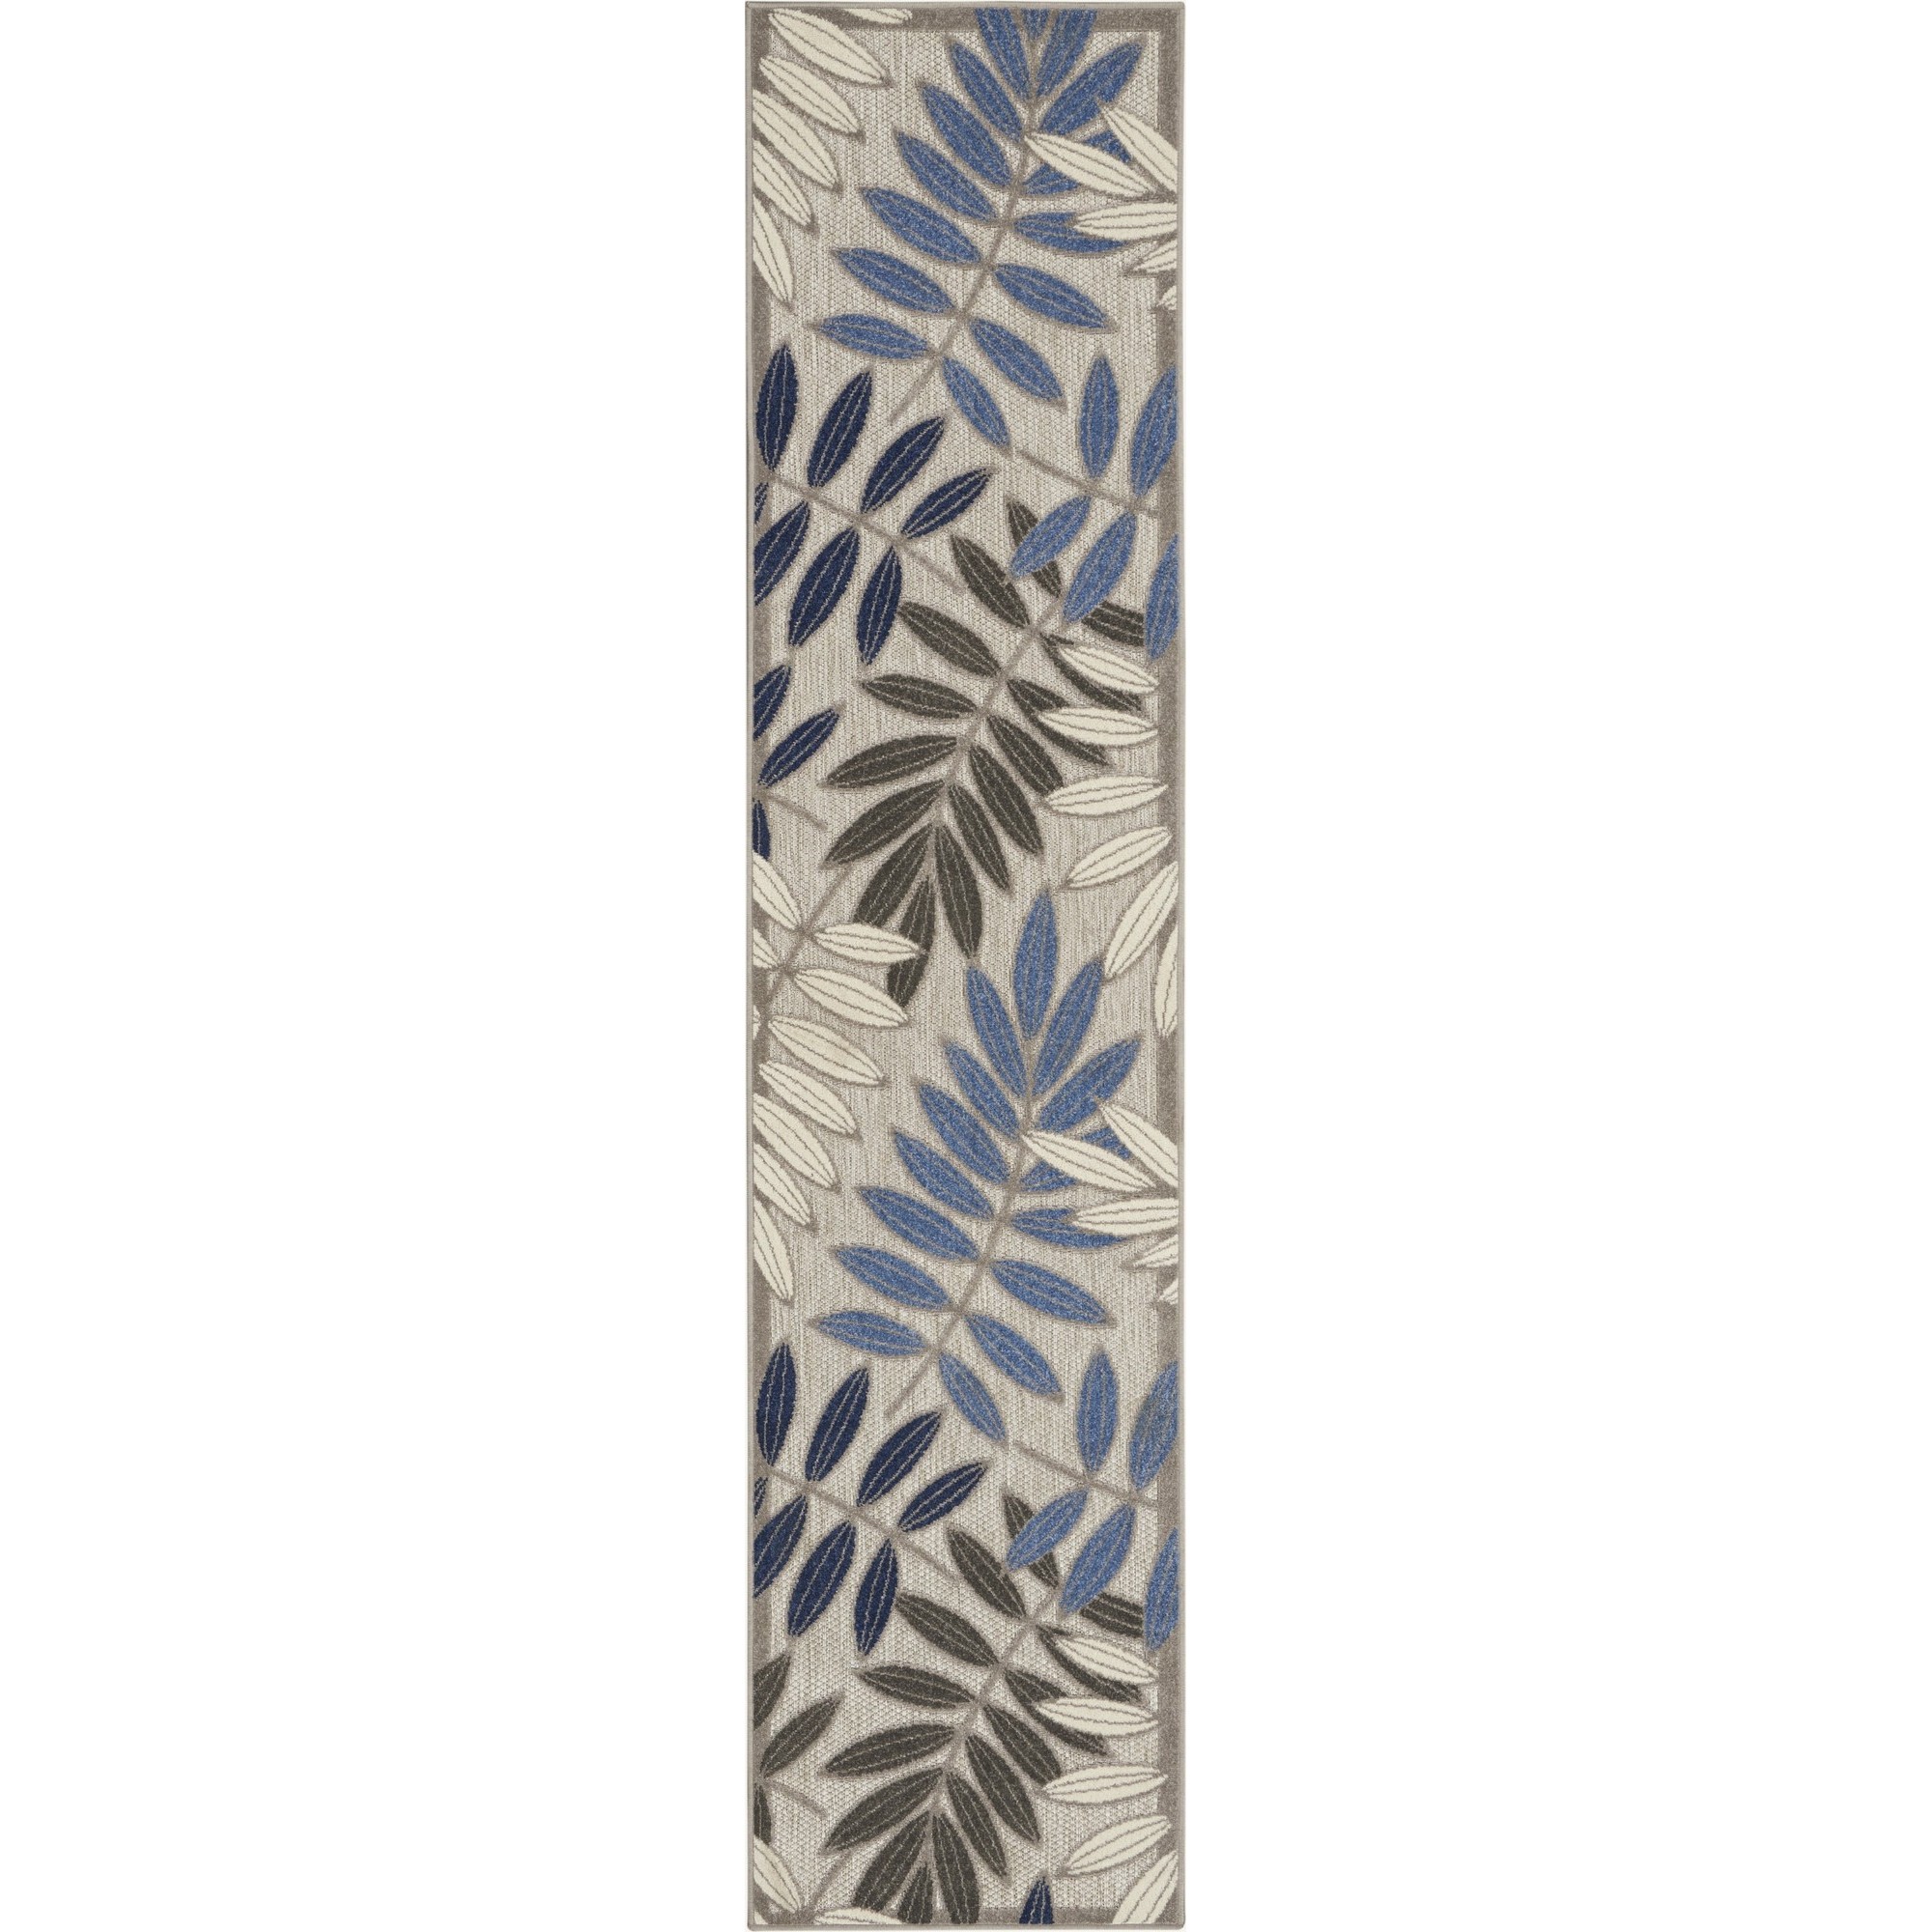 2 x 6 Gray and Blue Leaves Indoor Outdoor Runner Rug